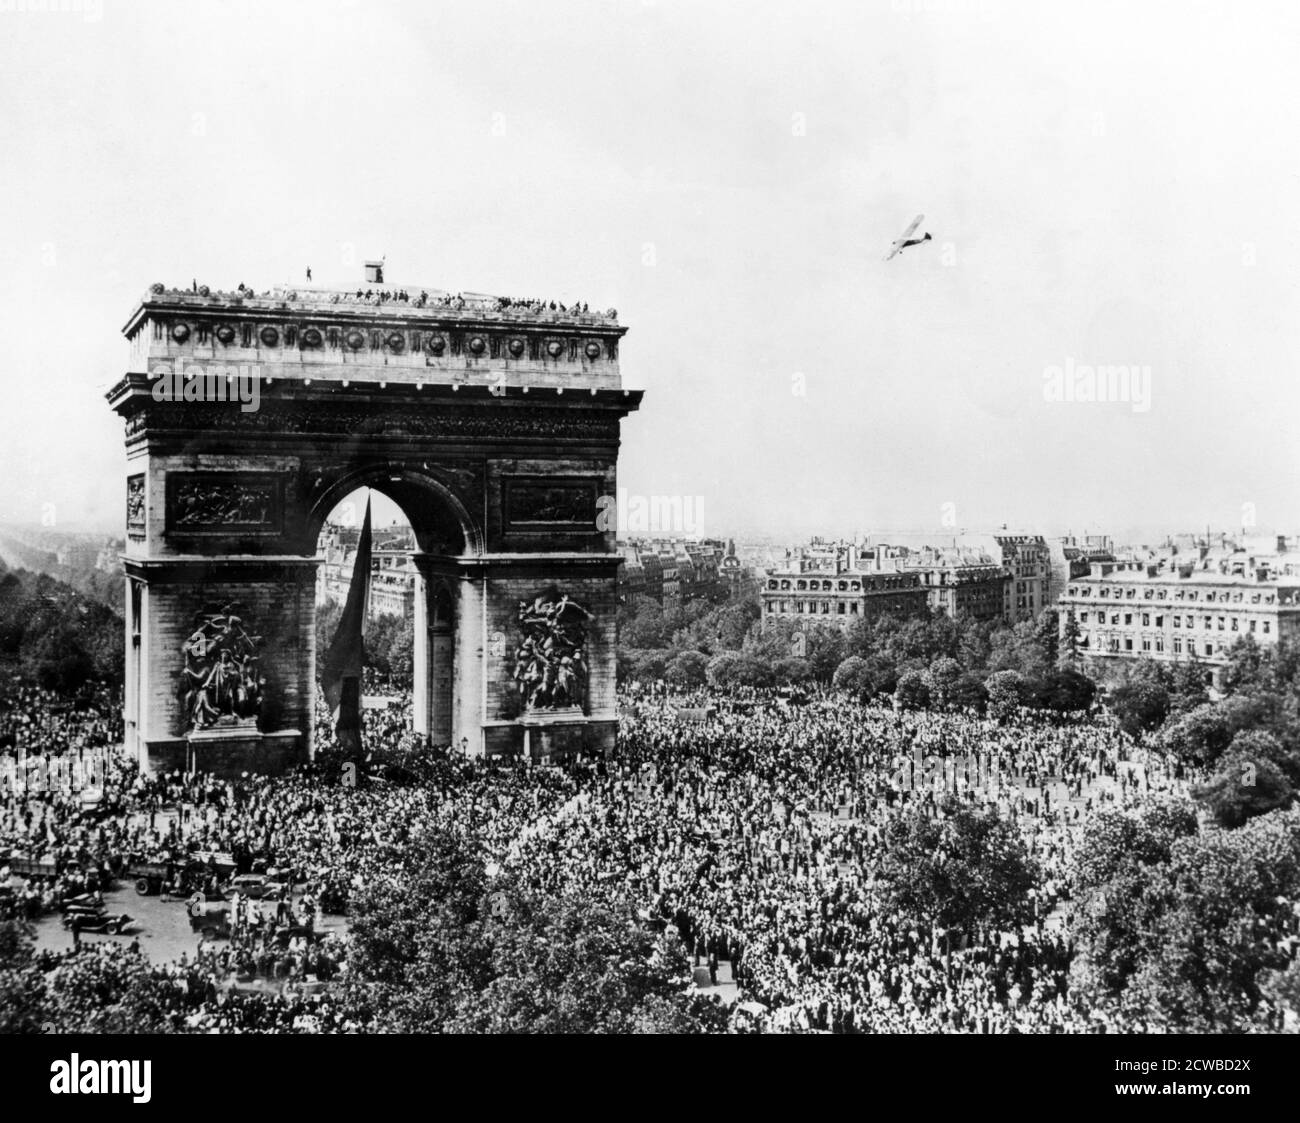 Celebrating the liberation of Paris, 26 August 1944. Crowds gathered around the Arc de Triomphe the day after the German forces in the city surrendered to the Allies. The photographer is unknown. Stock Photo